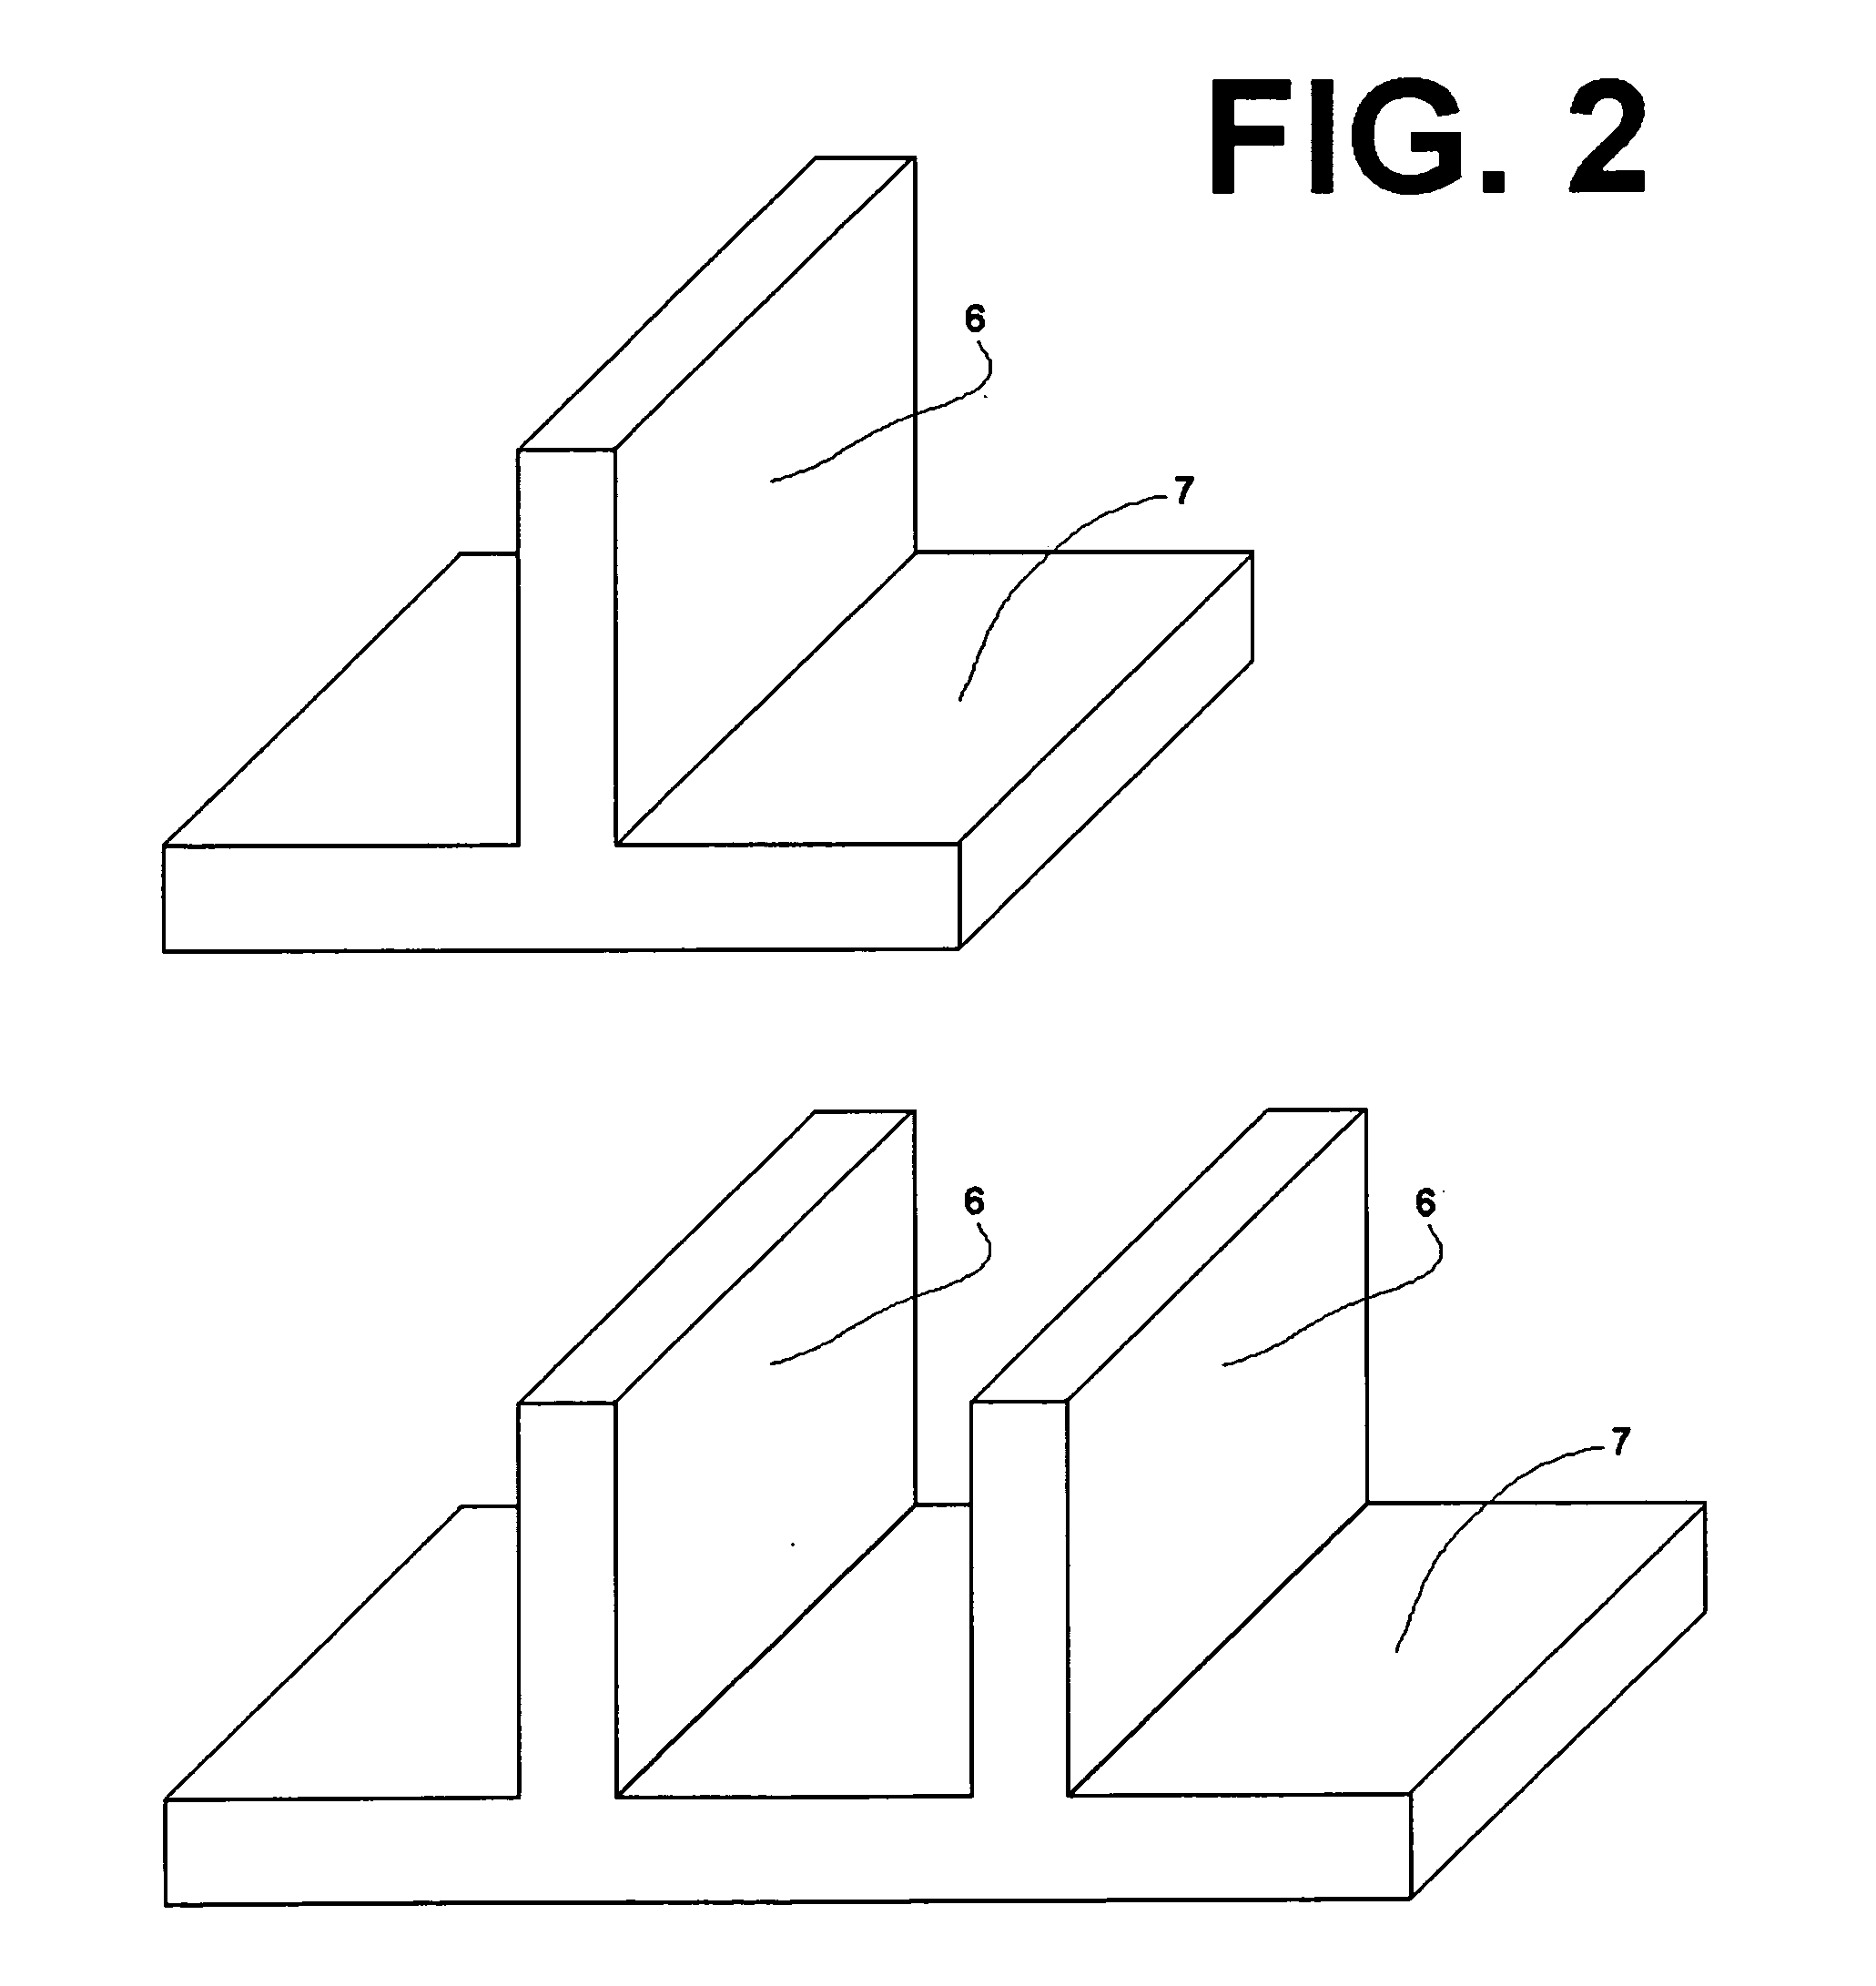 Seismic base isloation and energy dissipation device